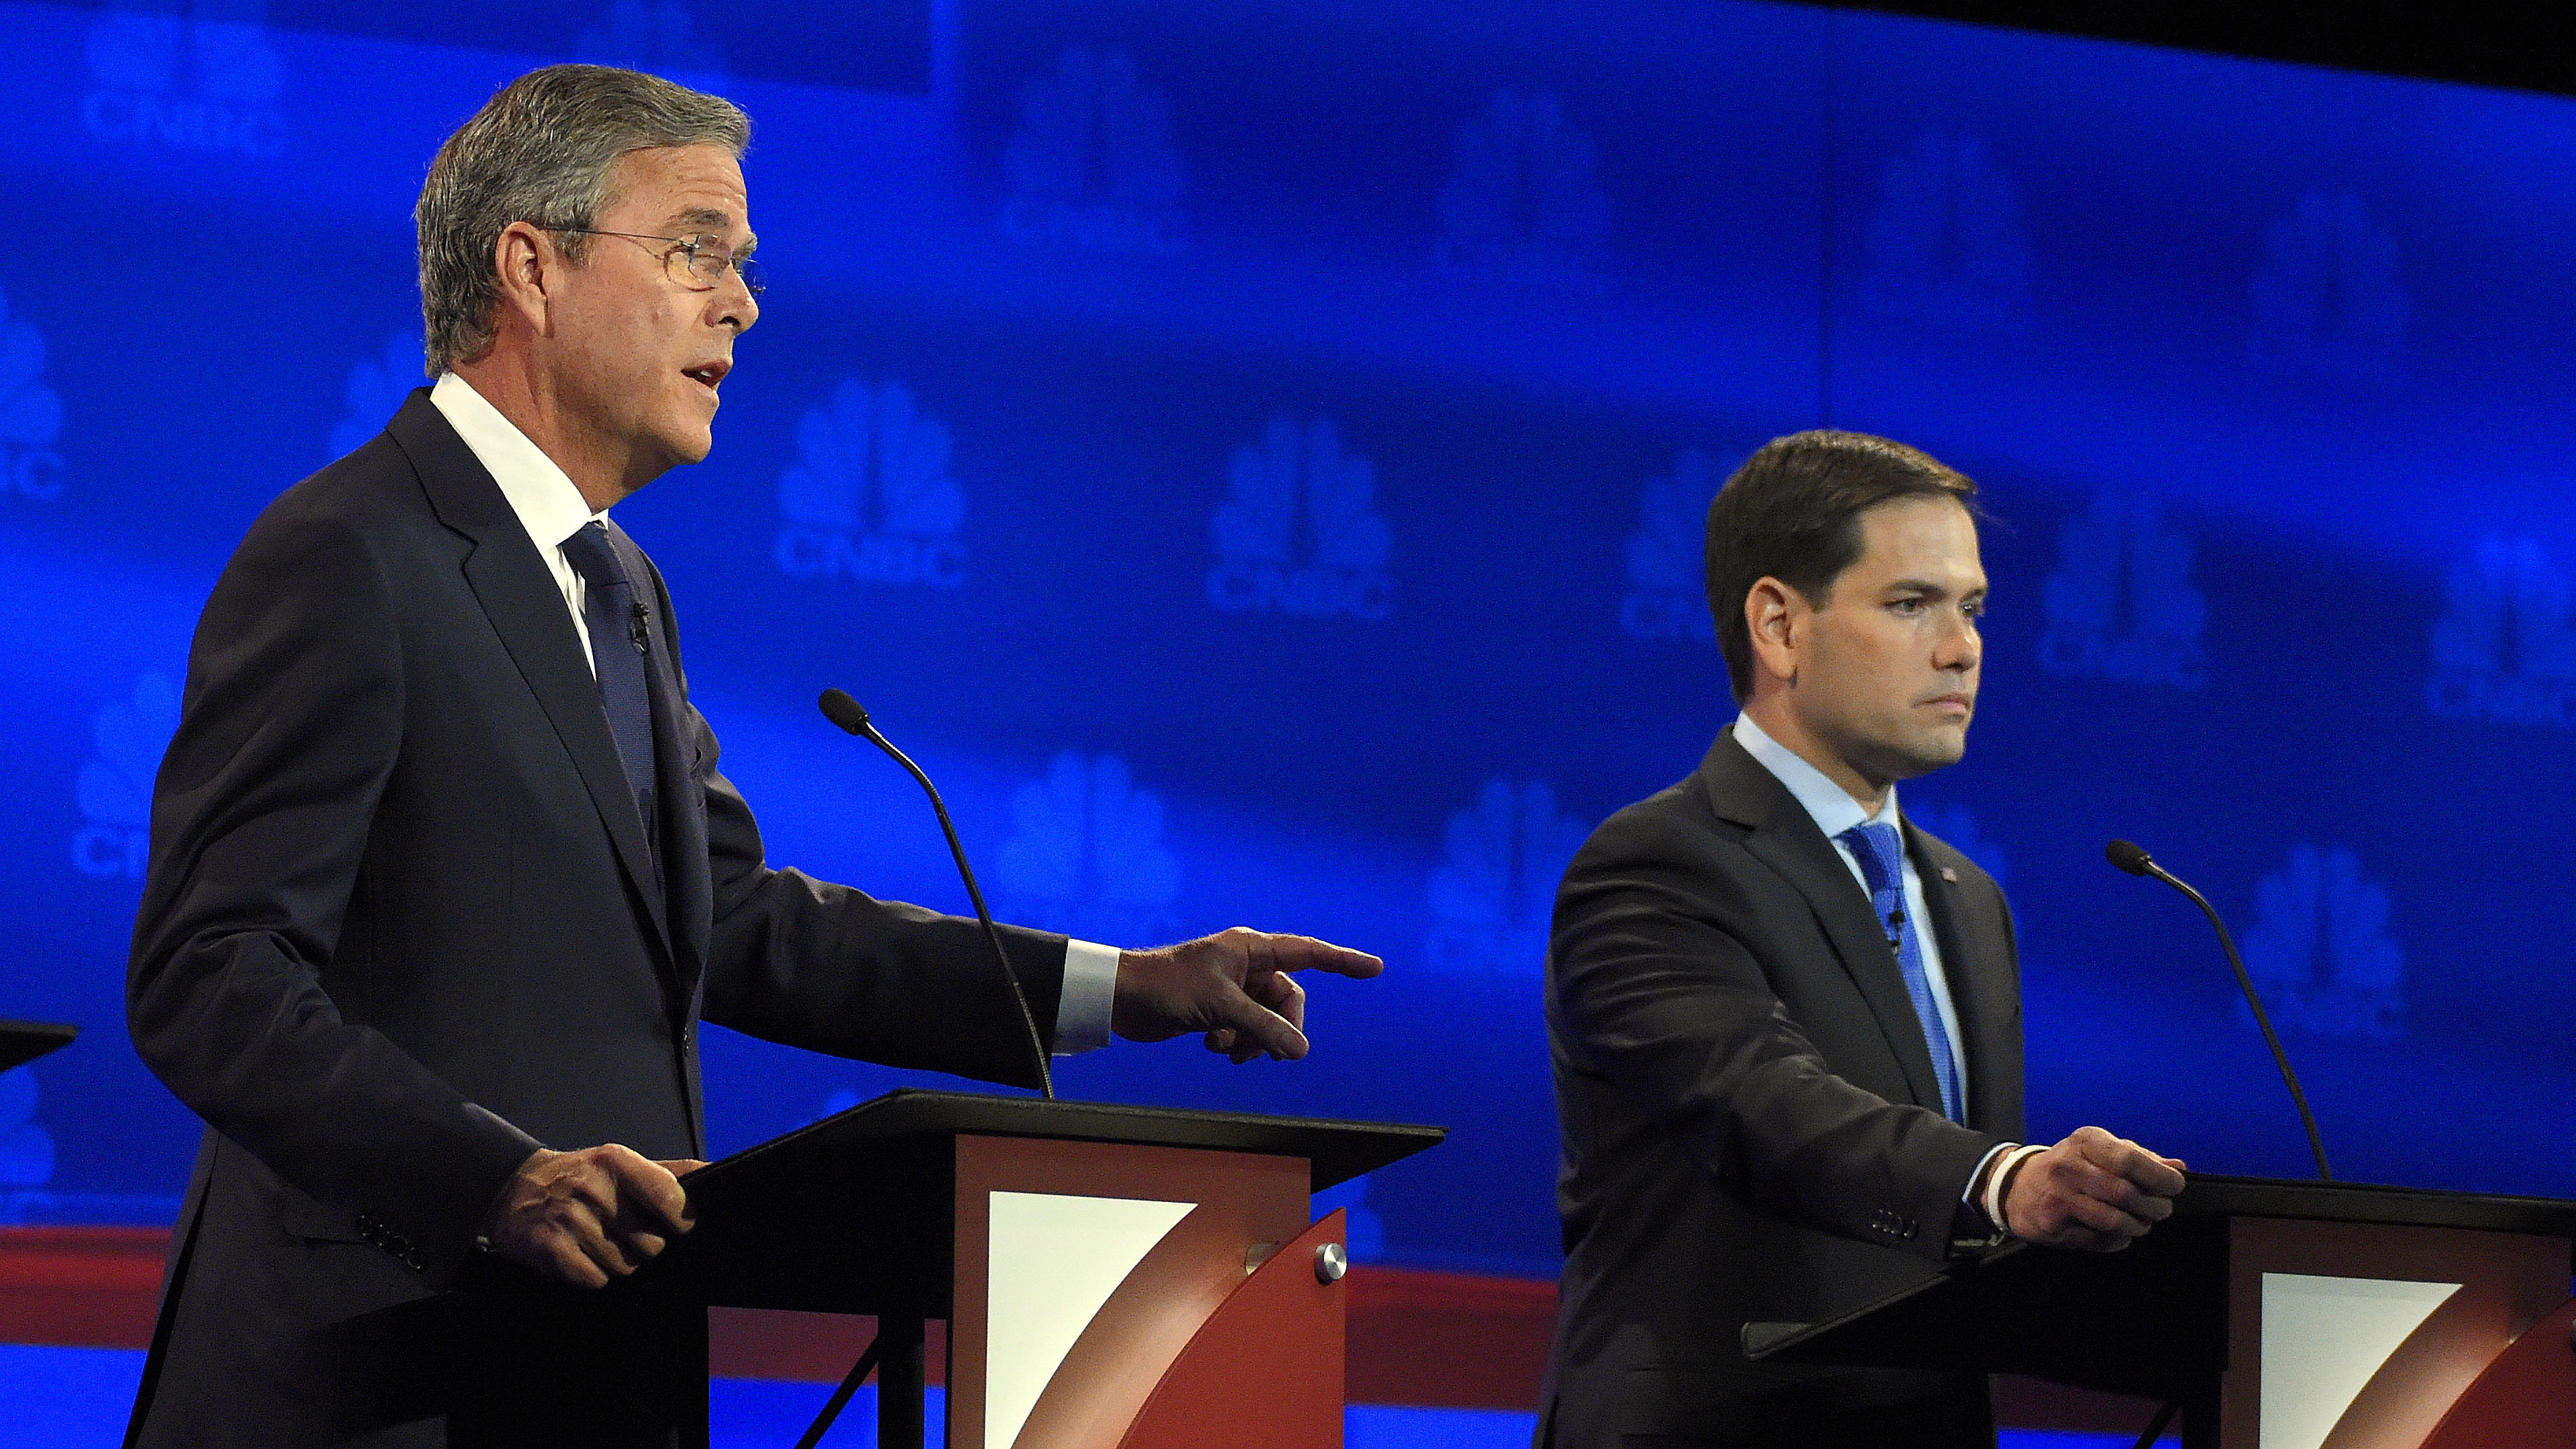 Jeb Bush (left) and Marco Rubio at the CNBC Republican presidential debate Wednesday. Their battling of late is leaving some Florida Republicans with an uncomfortable choice. (Photo by Mark J. Terrill/AP)